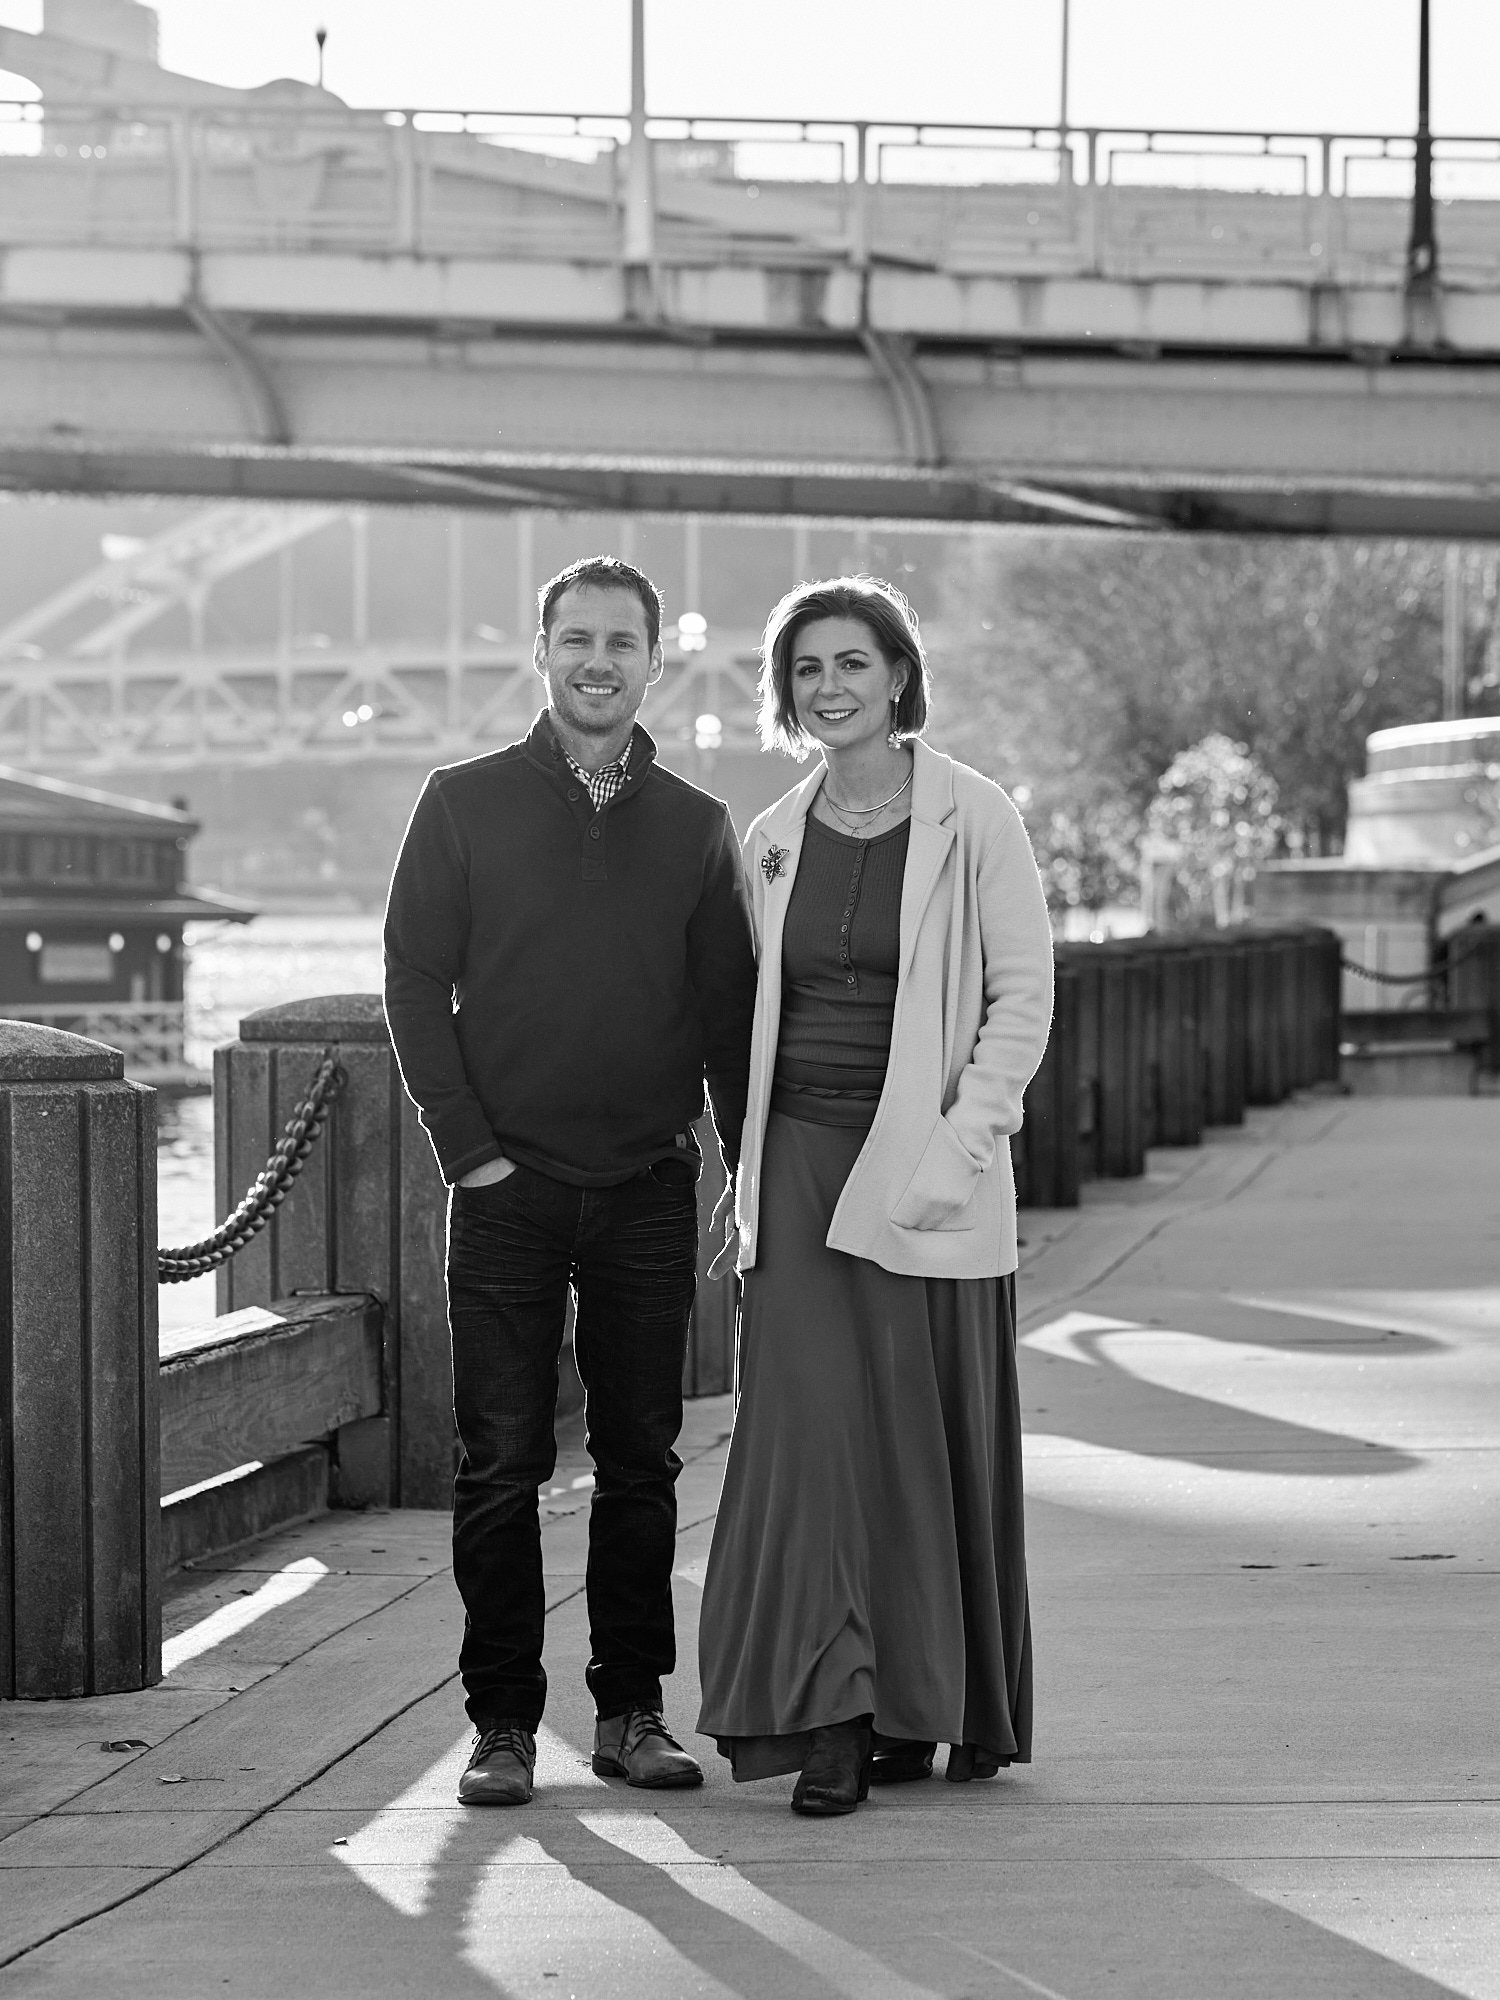  Crela Fry is posing with her husband and children by Allegheny River on the North Shore in Pittsburgh, Pennsylvania. Images are monochrome. The cityscape with yellow bridges is lit by the setting sun. 